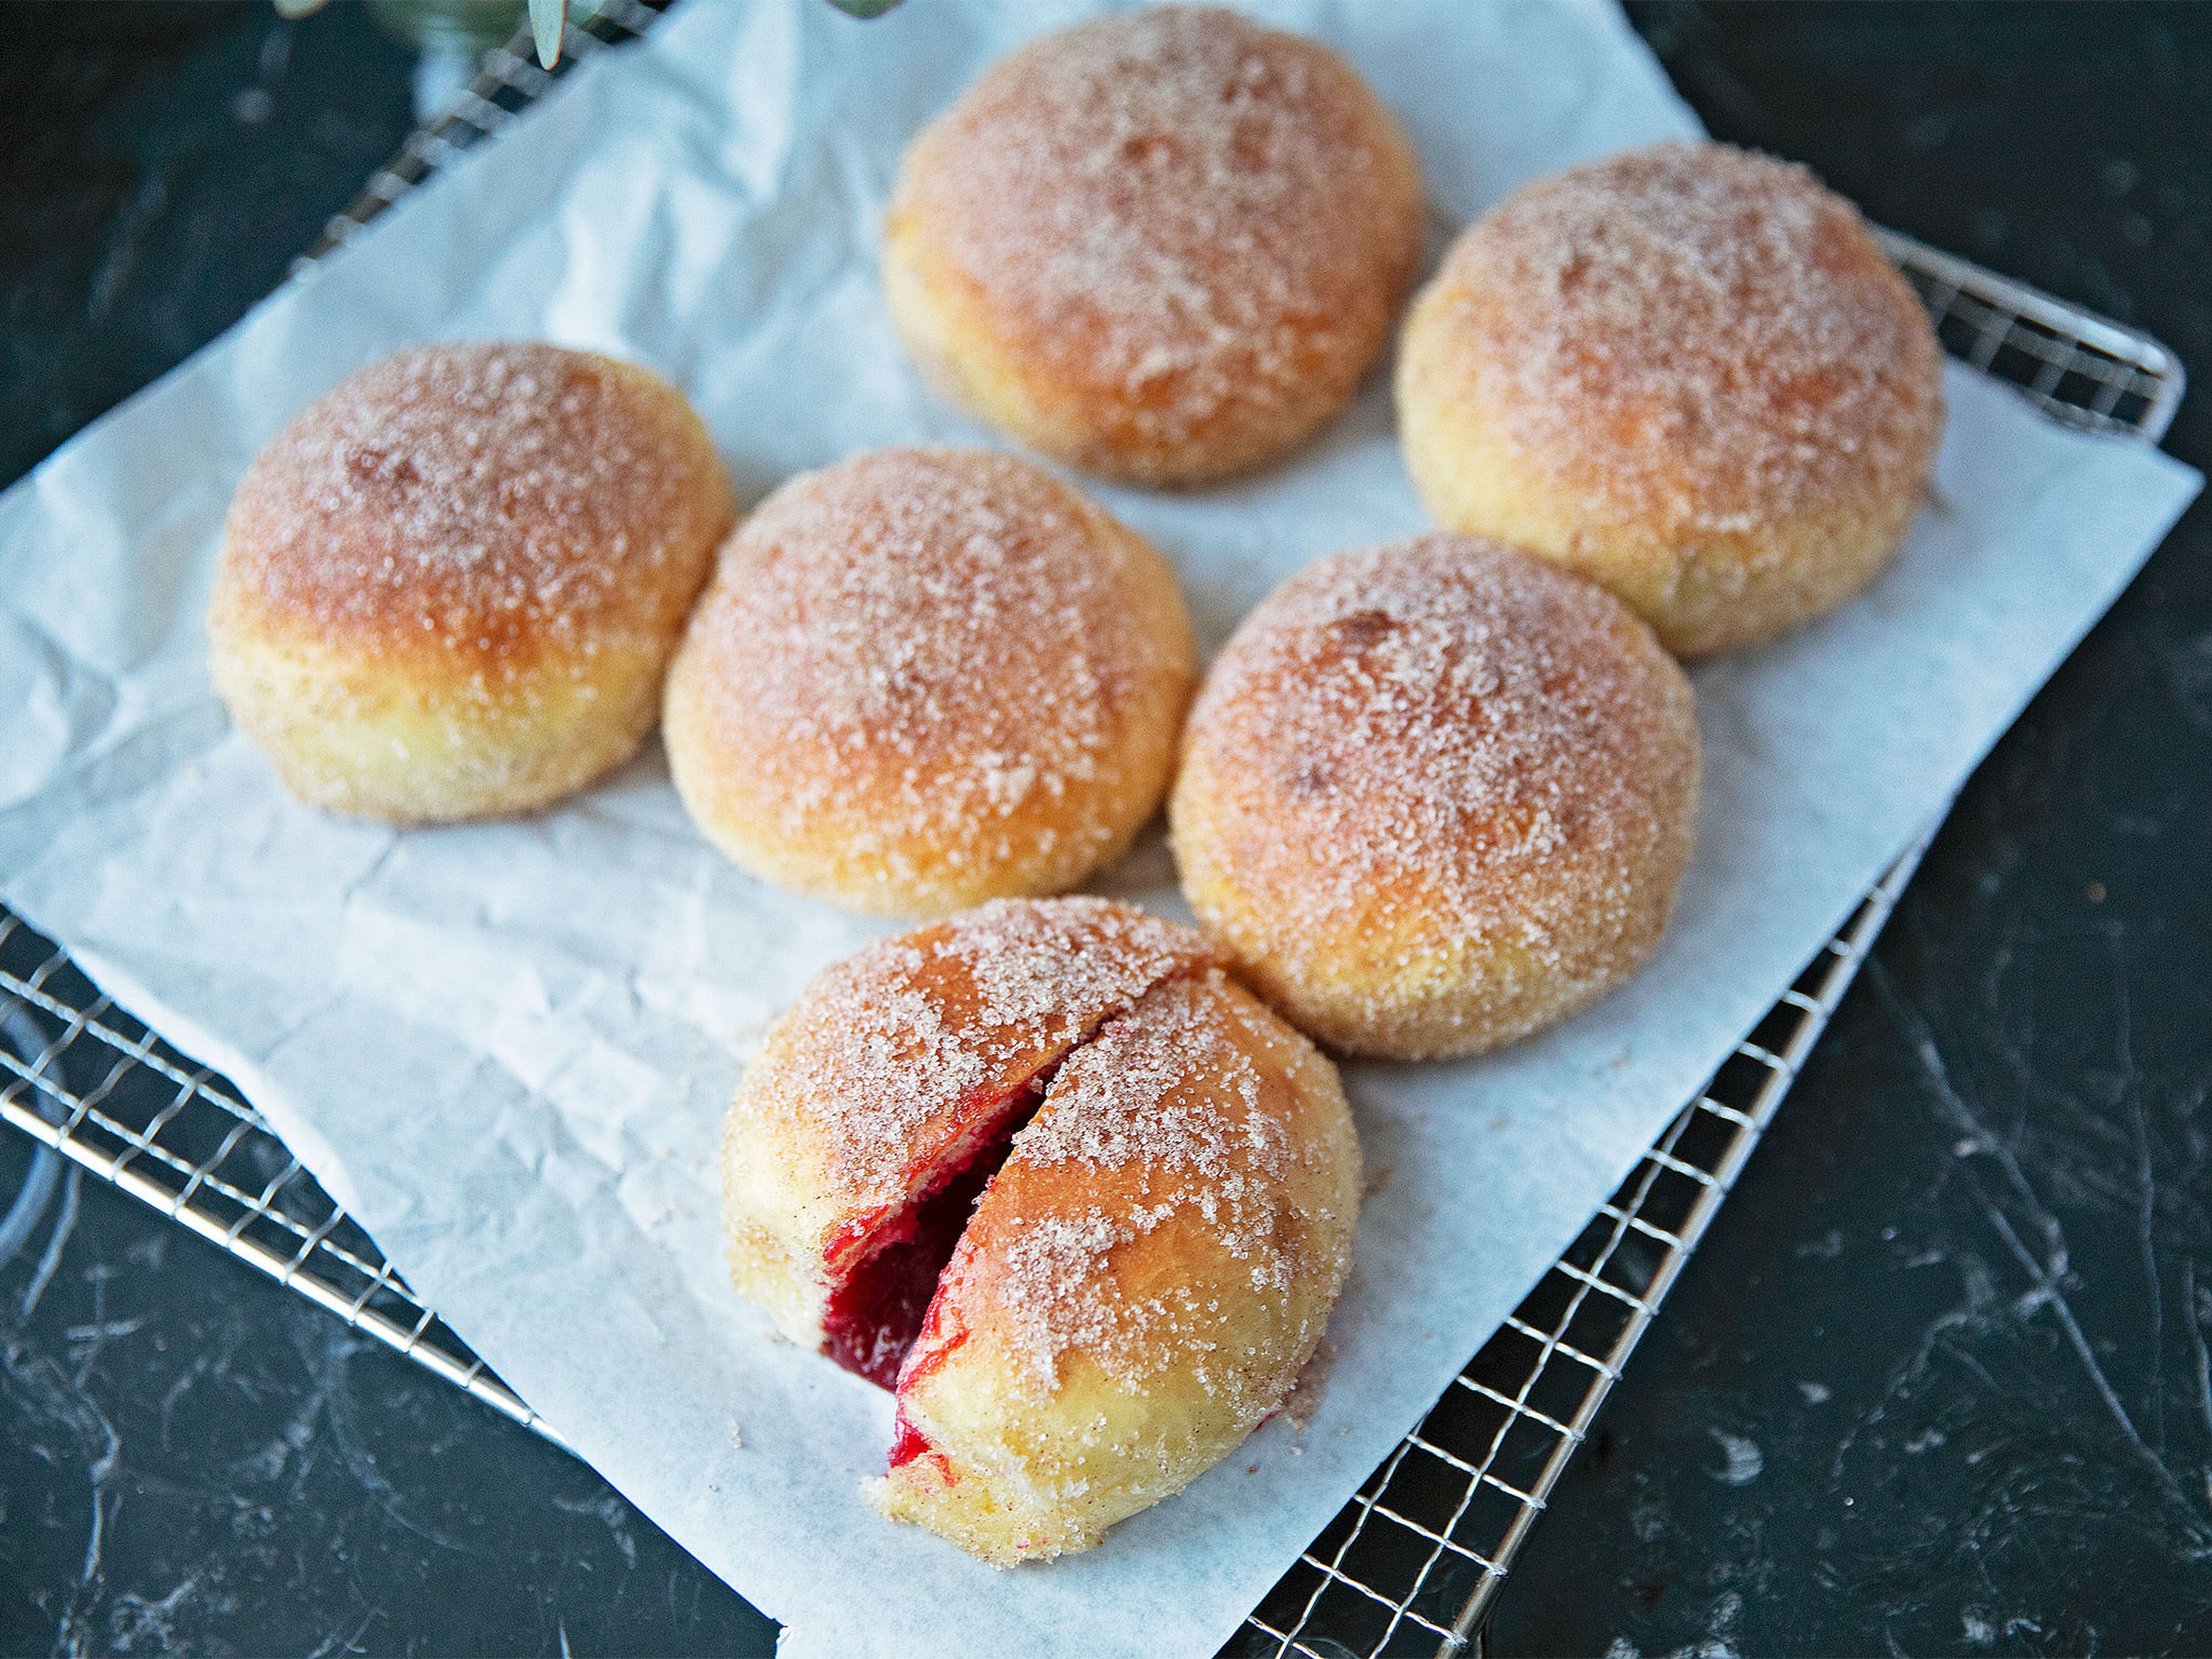 Baked cranberry and cinnamon doughnuts